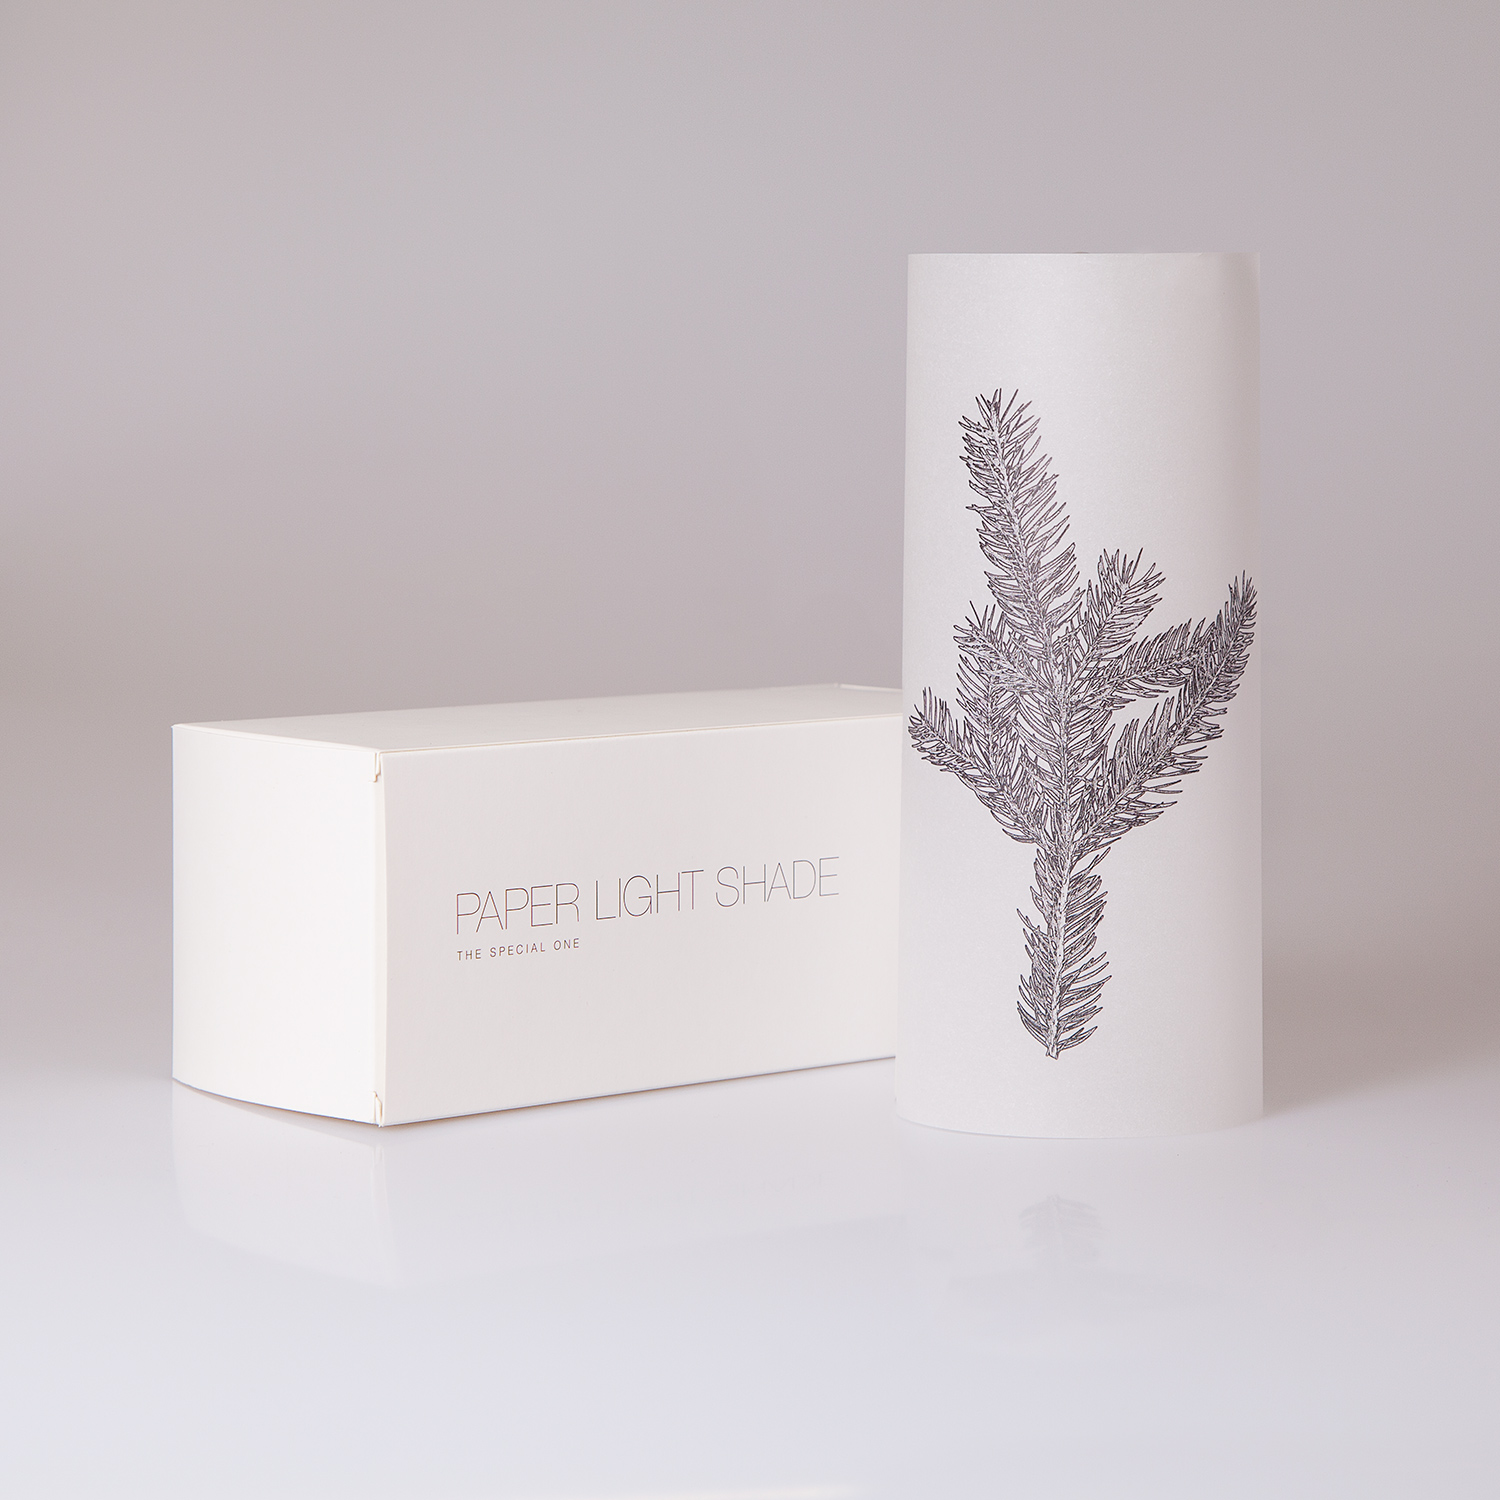 Paper Light Shade "Natur" - The Special One